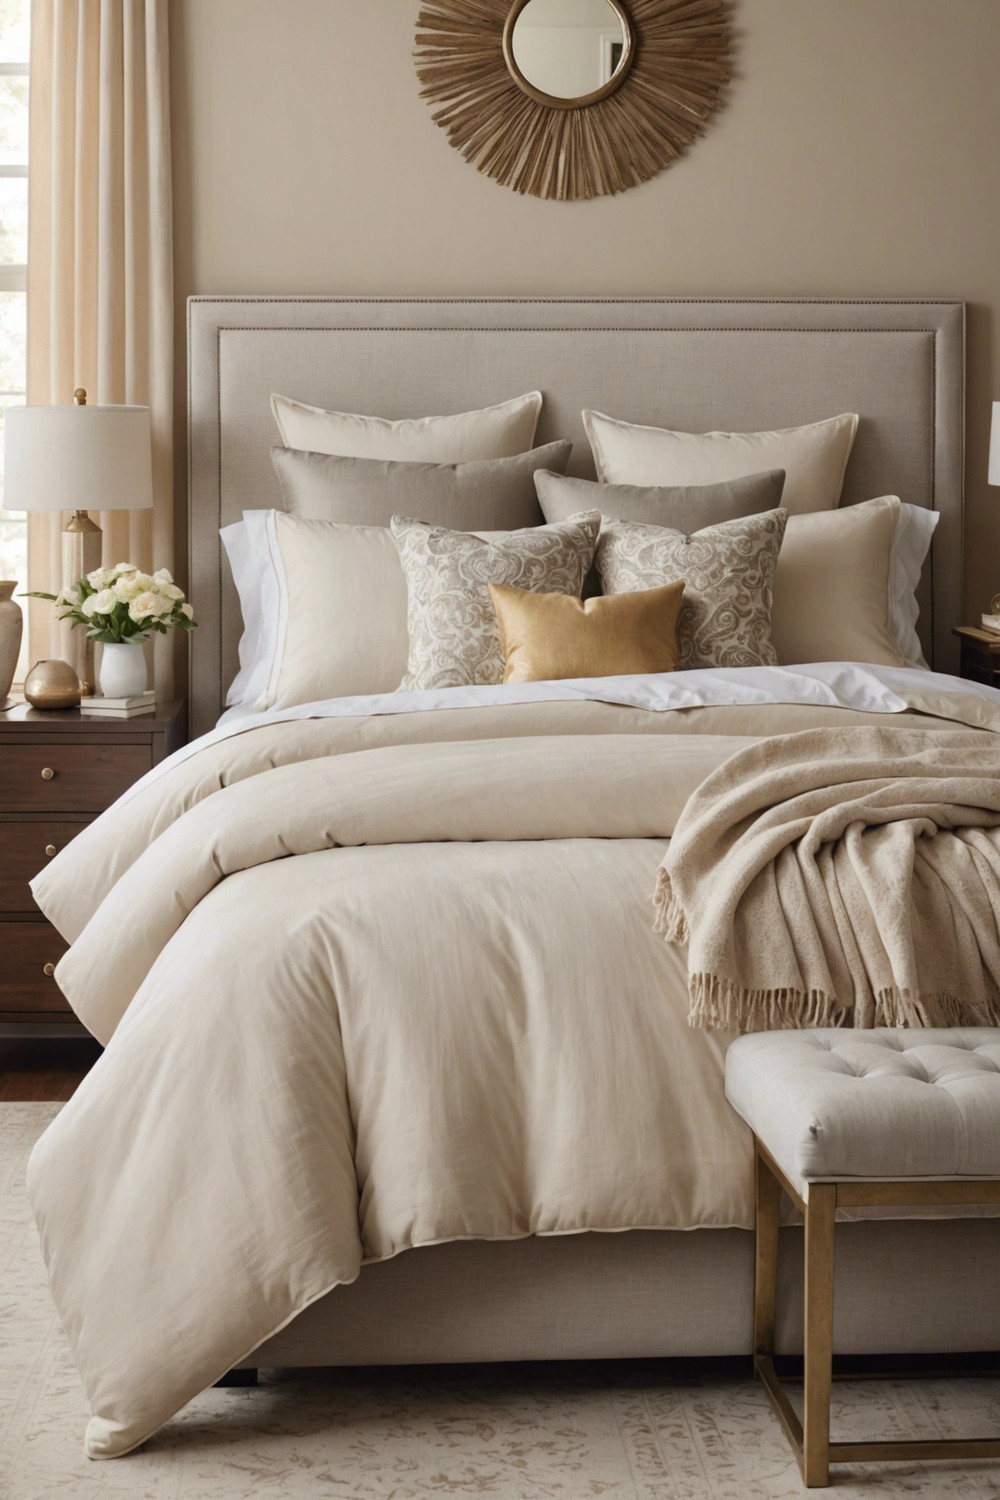 Use High-Quality Bedding and Linens